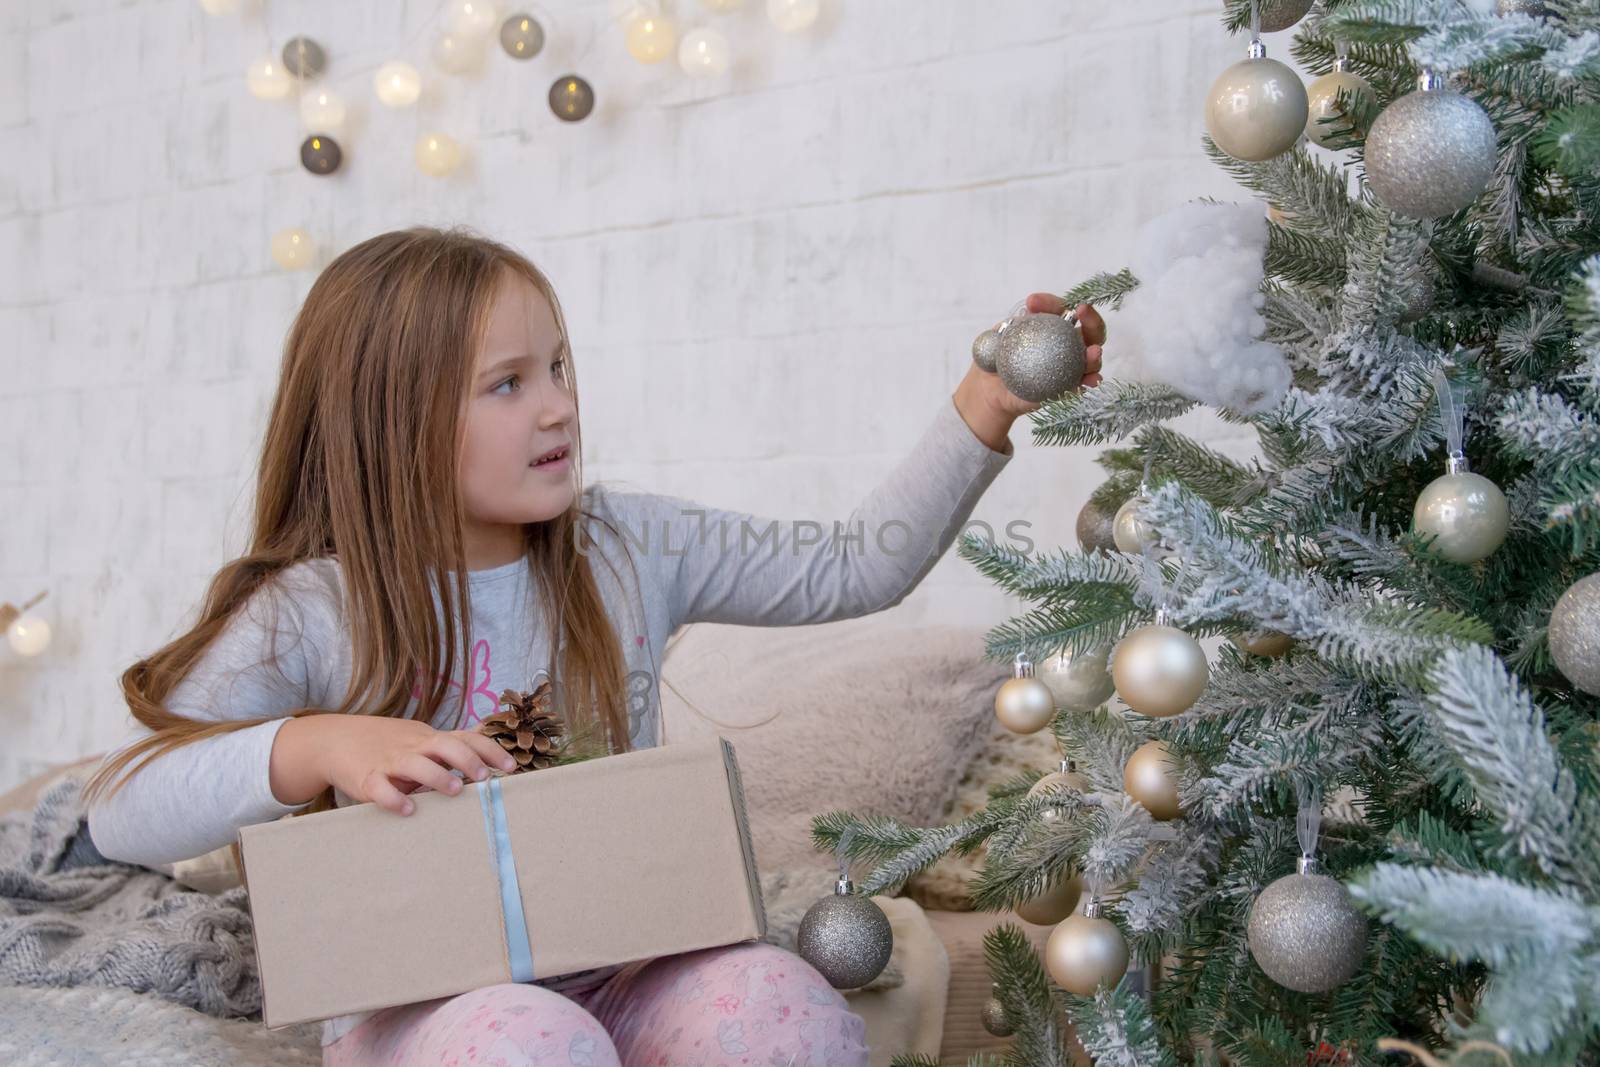 Girl under Christmas tree with ball and gift